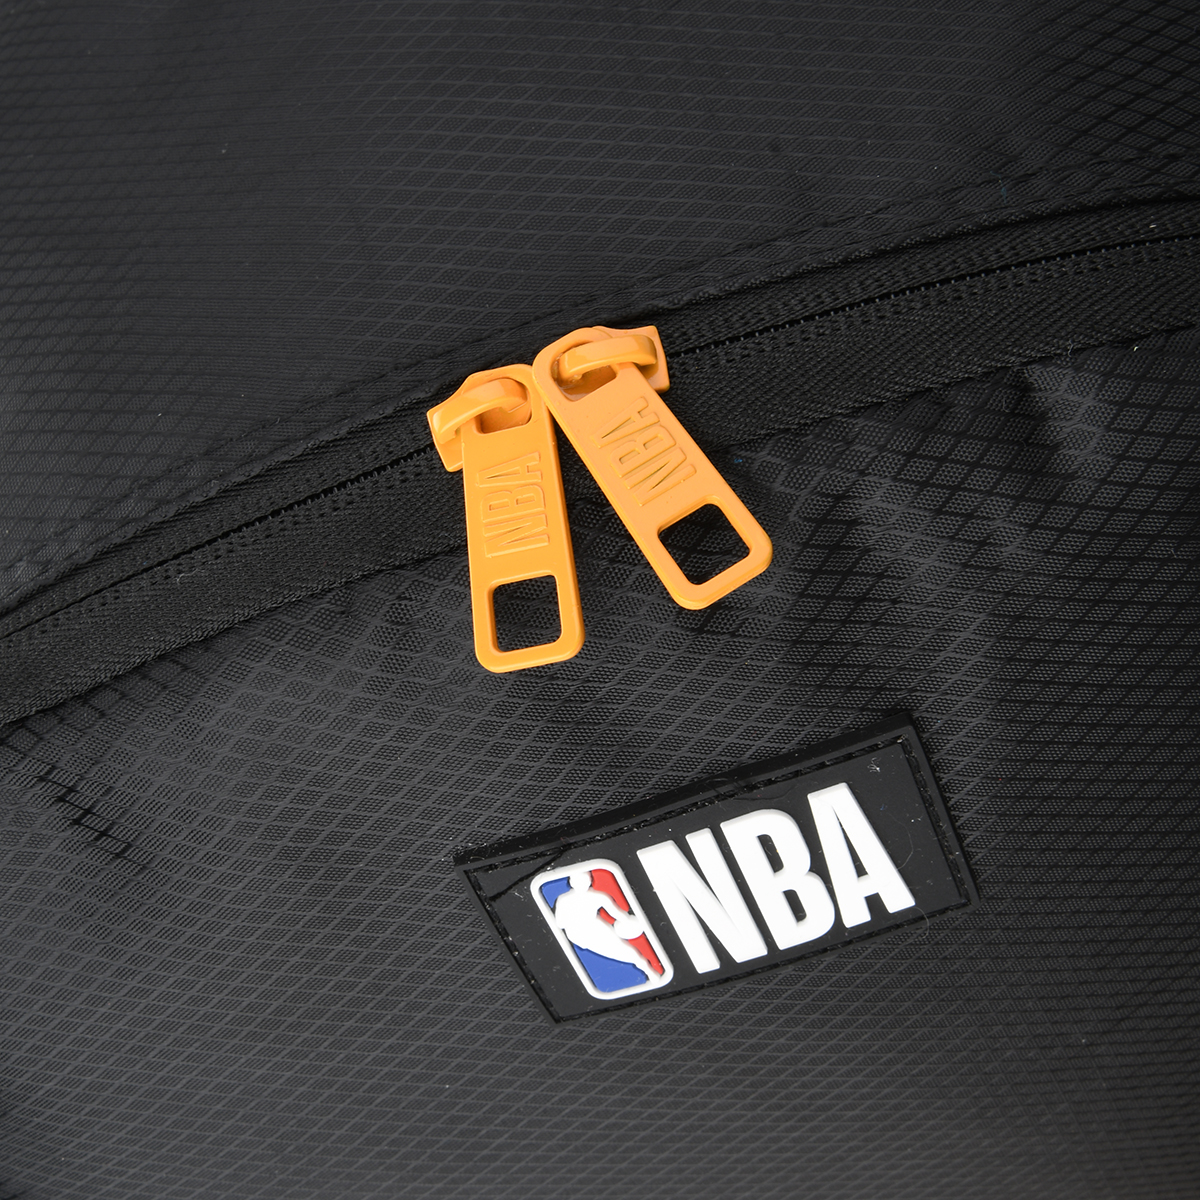 Mochila NBA Lakers,  image number null